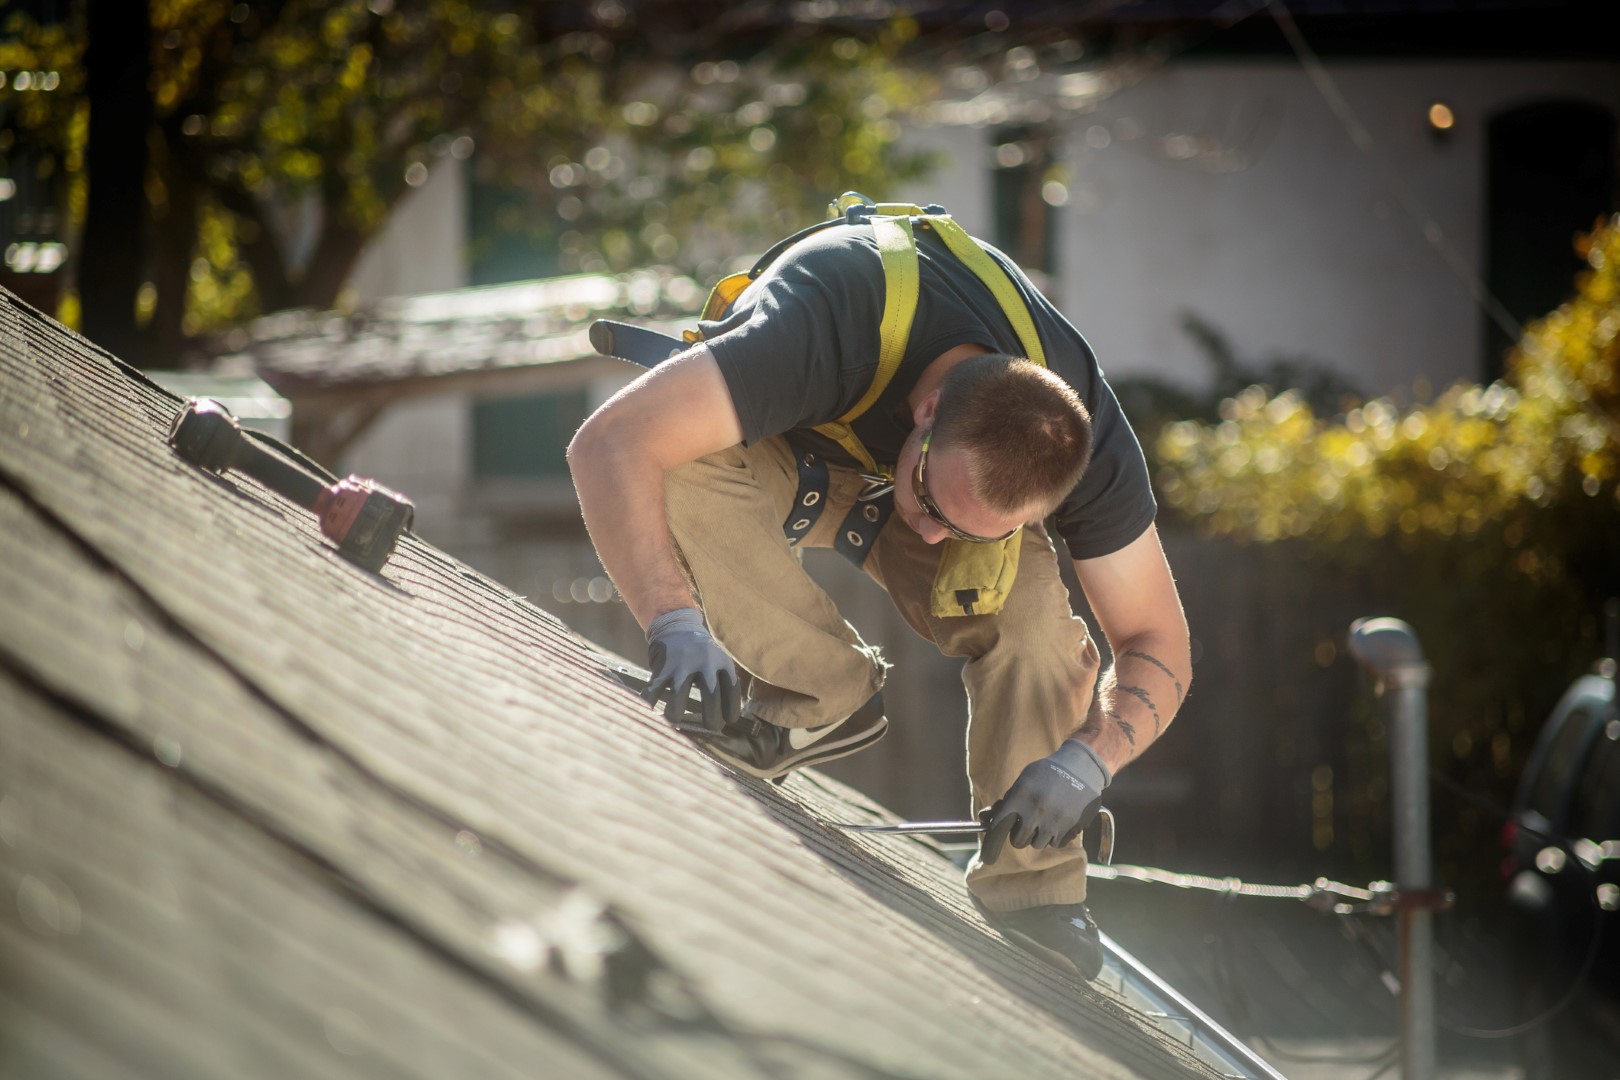 Solar panel installation worker working on roof of house